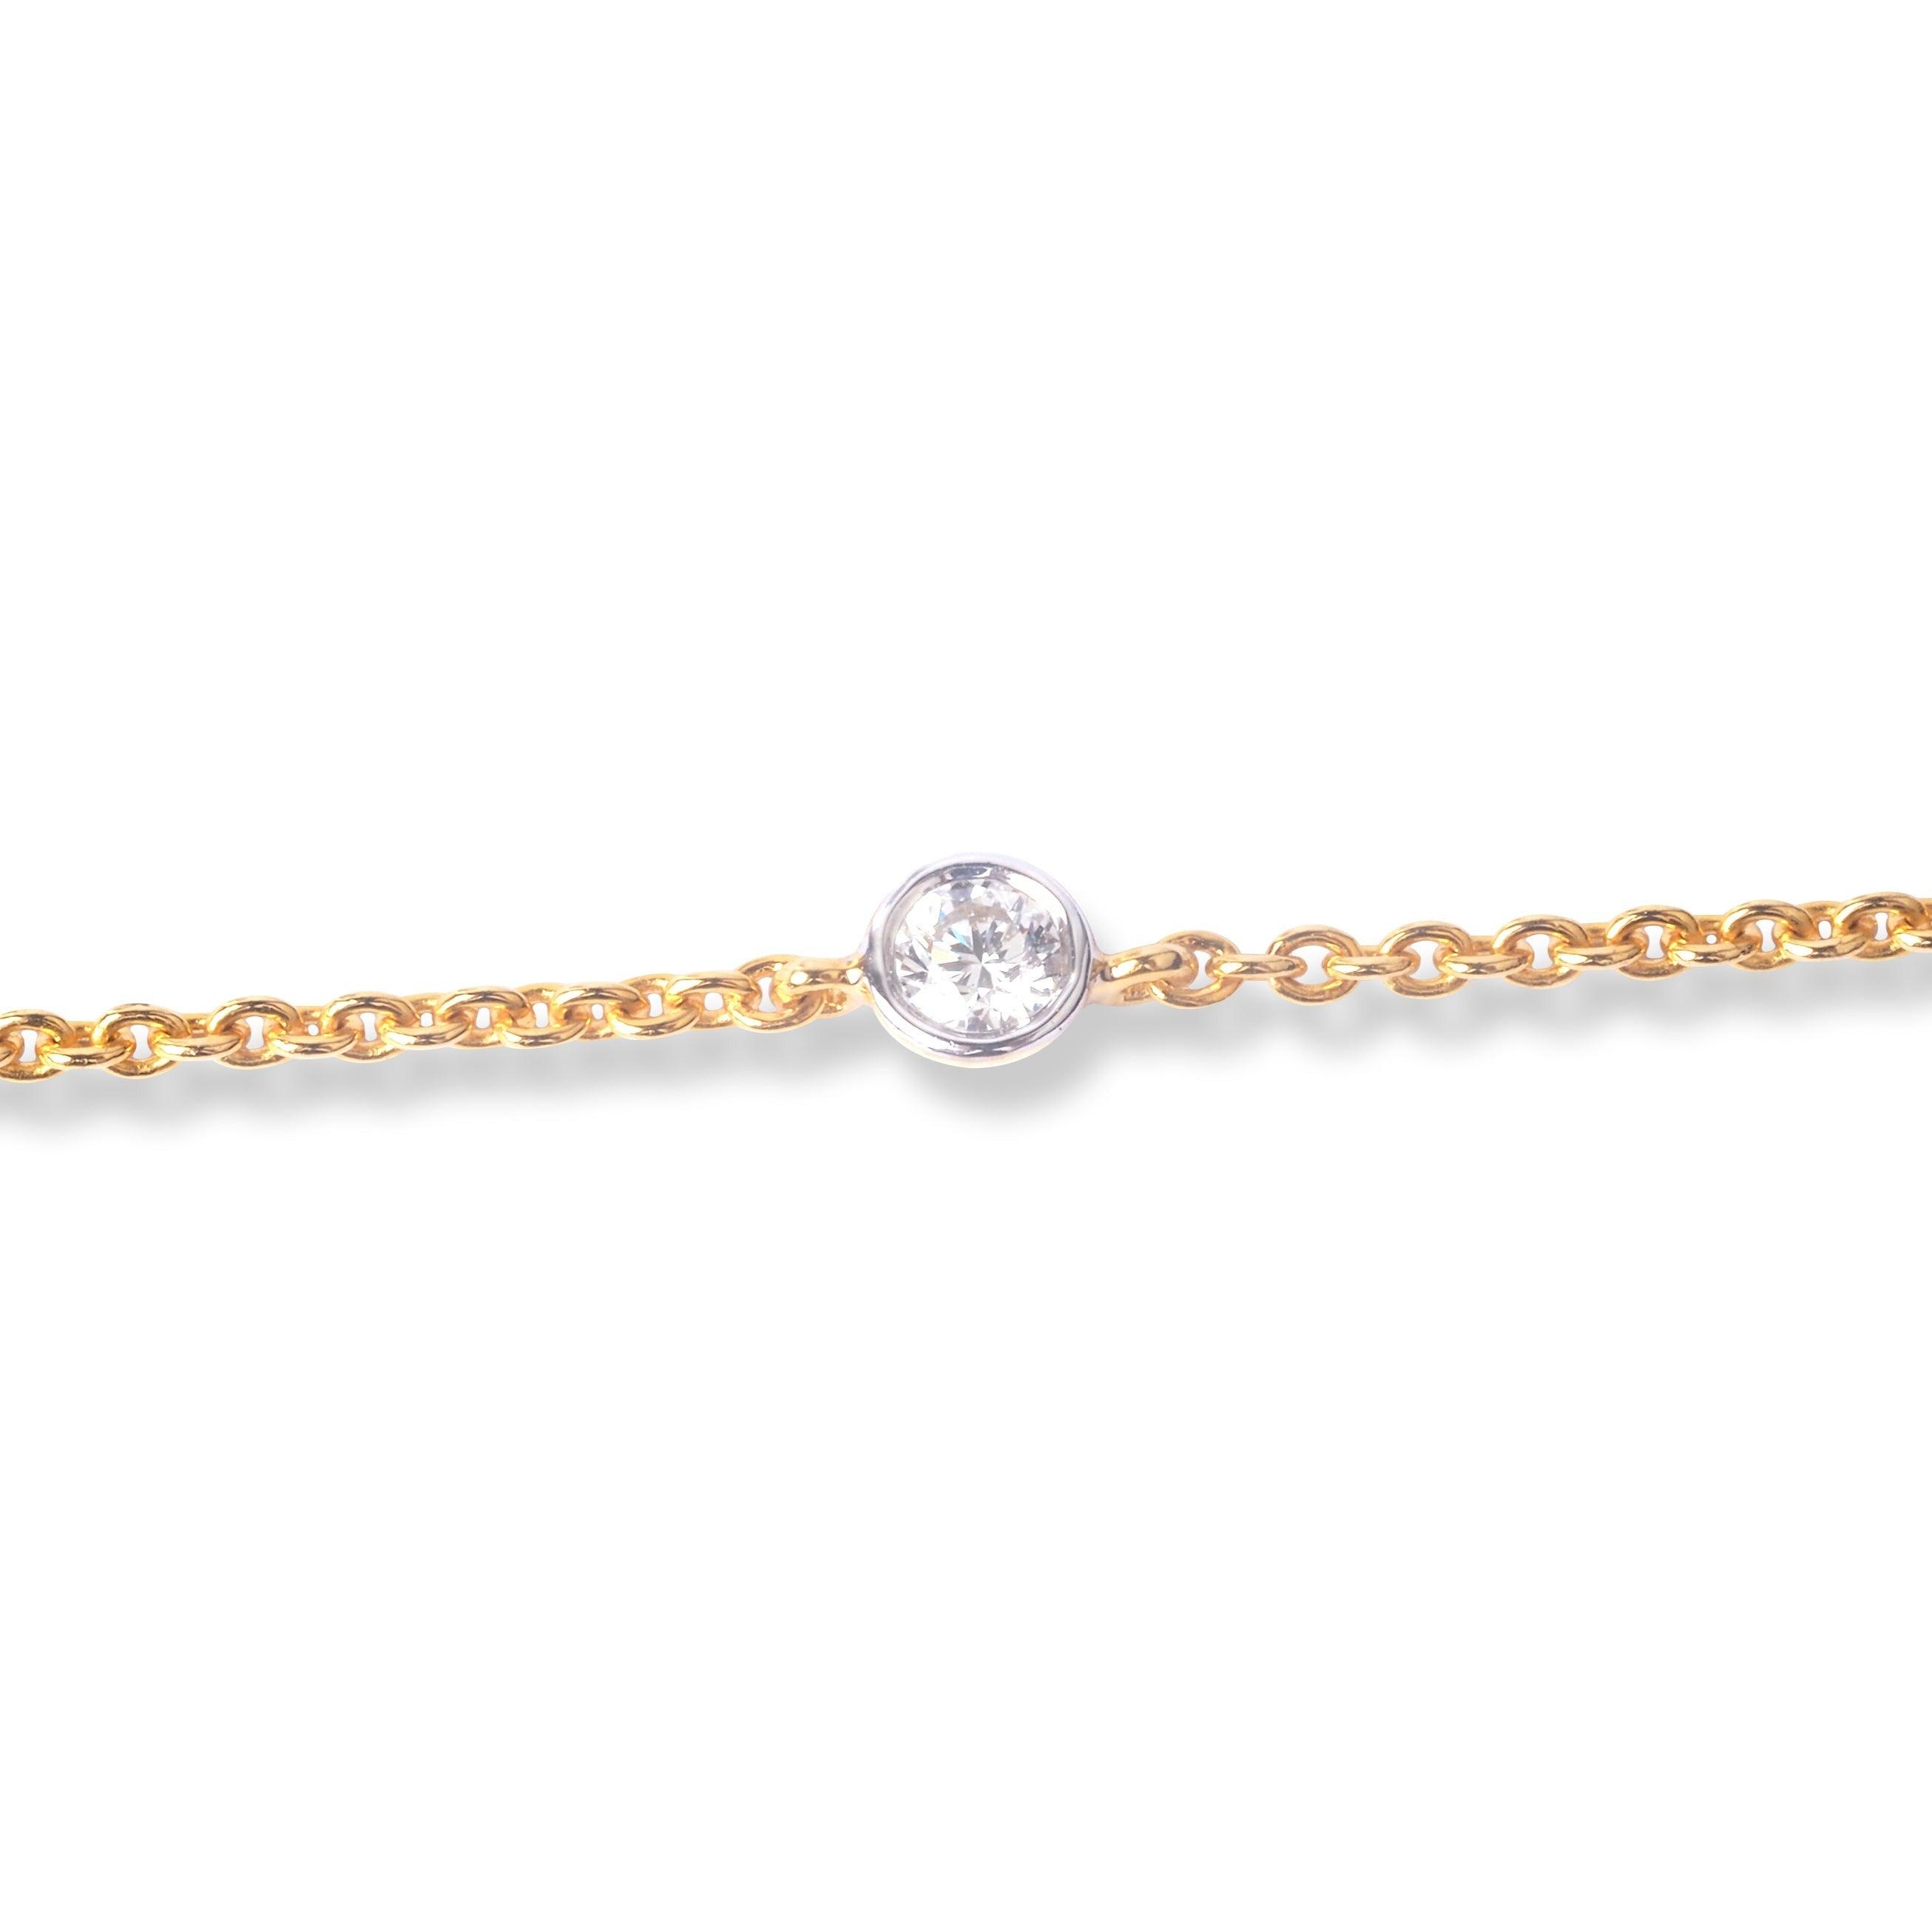 18ct Yellow Gold Solitaire Diamond Bracelet with Ring Clasp MCS6255 - Minar Jewellers